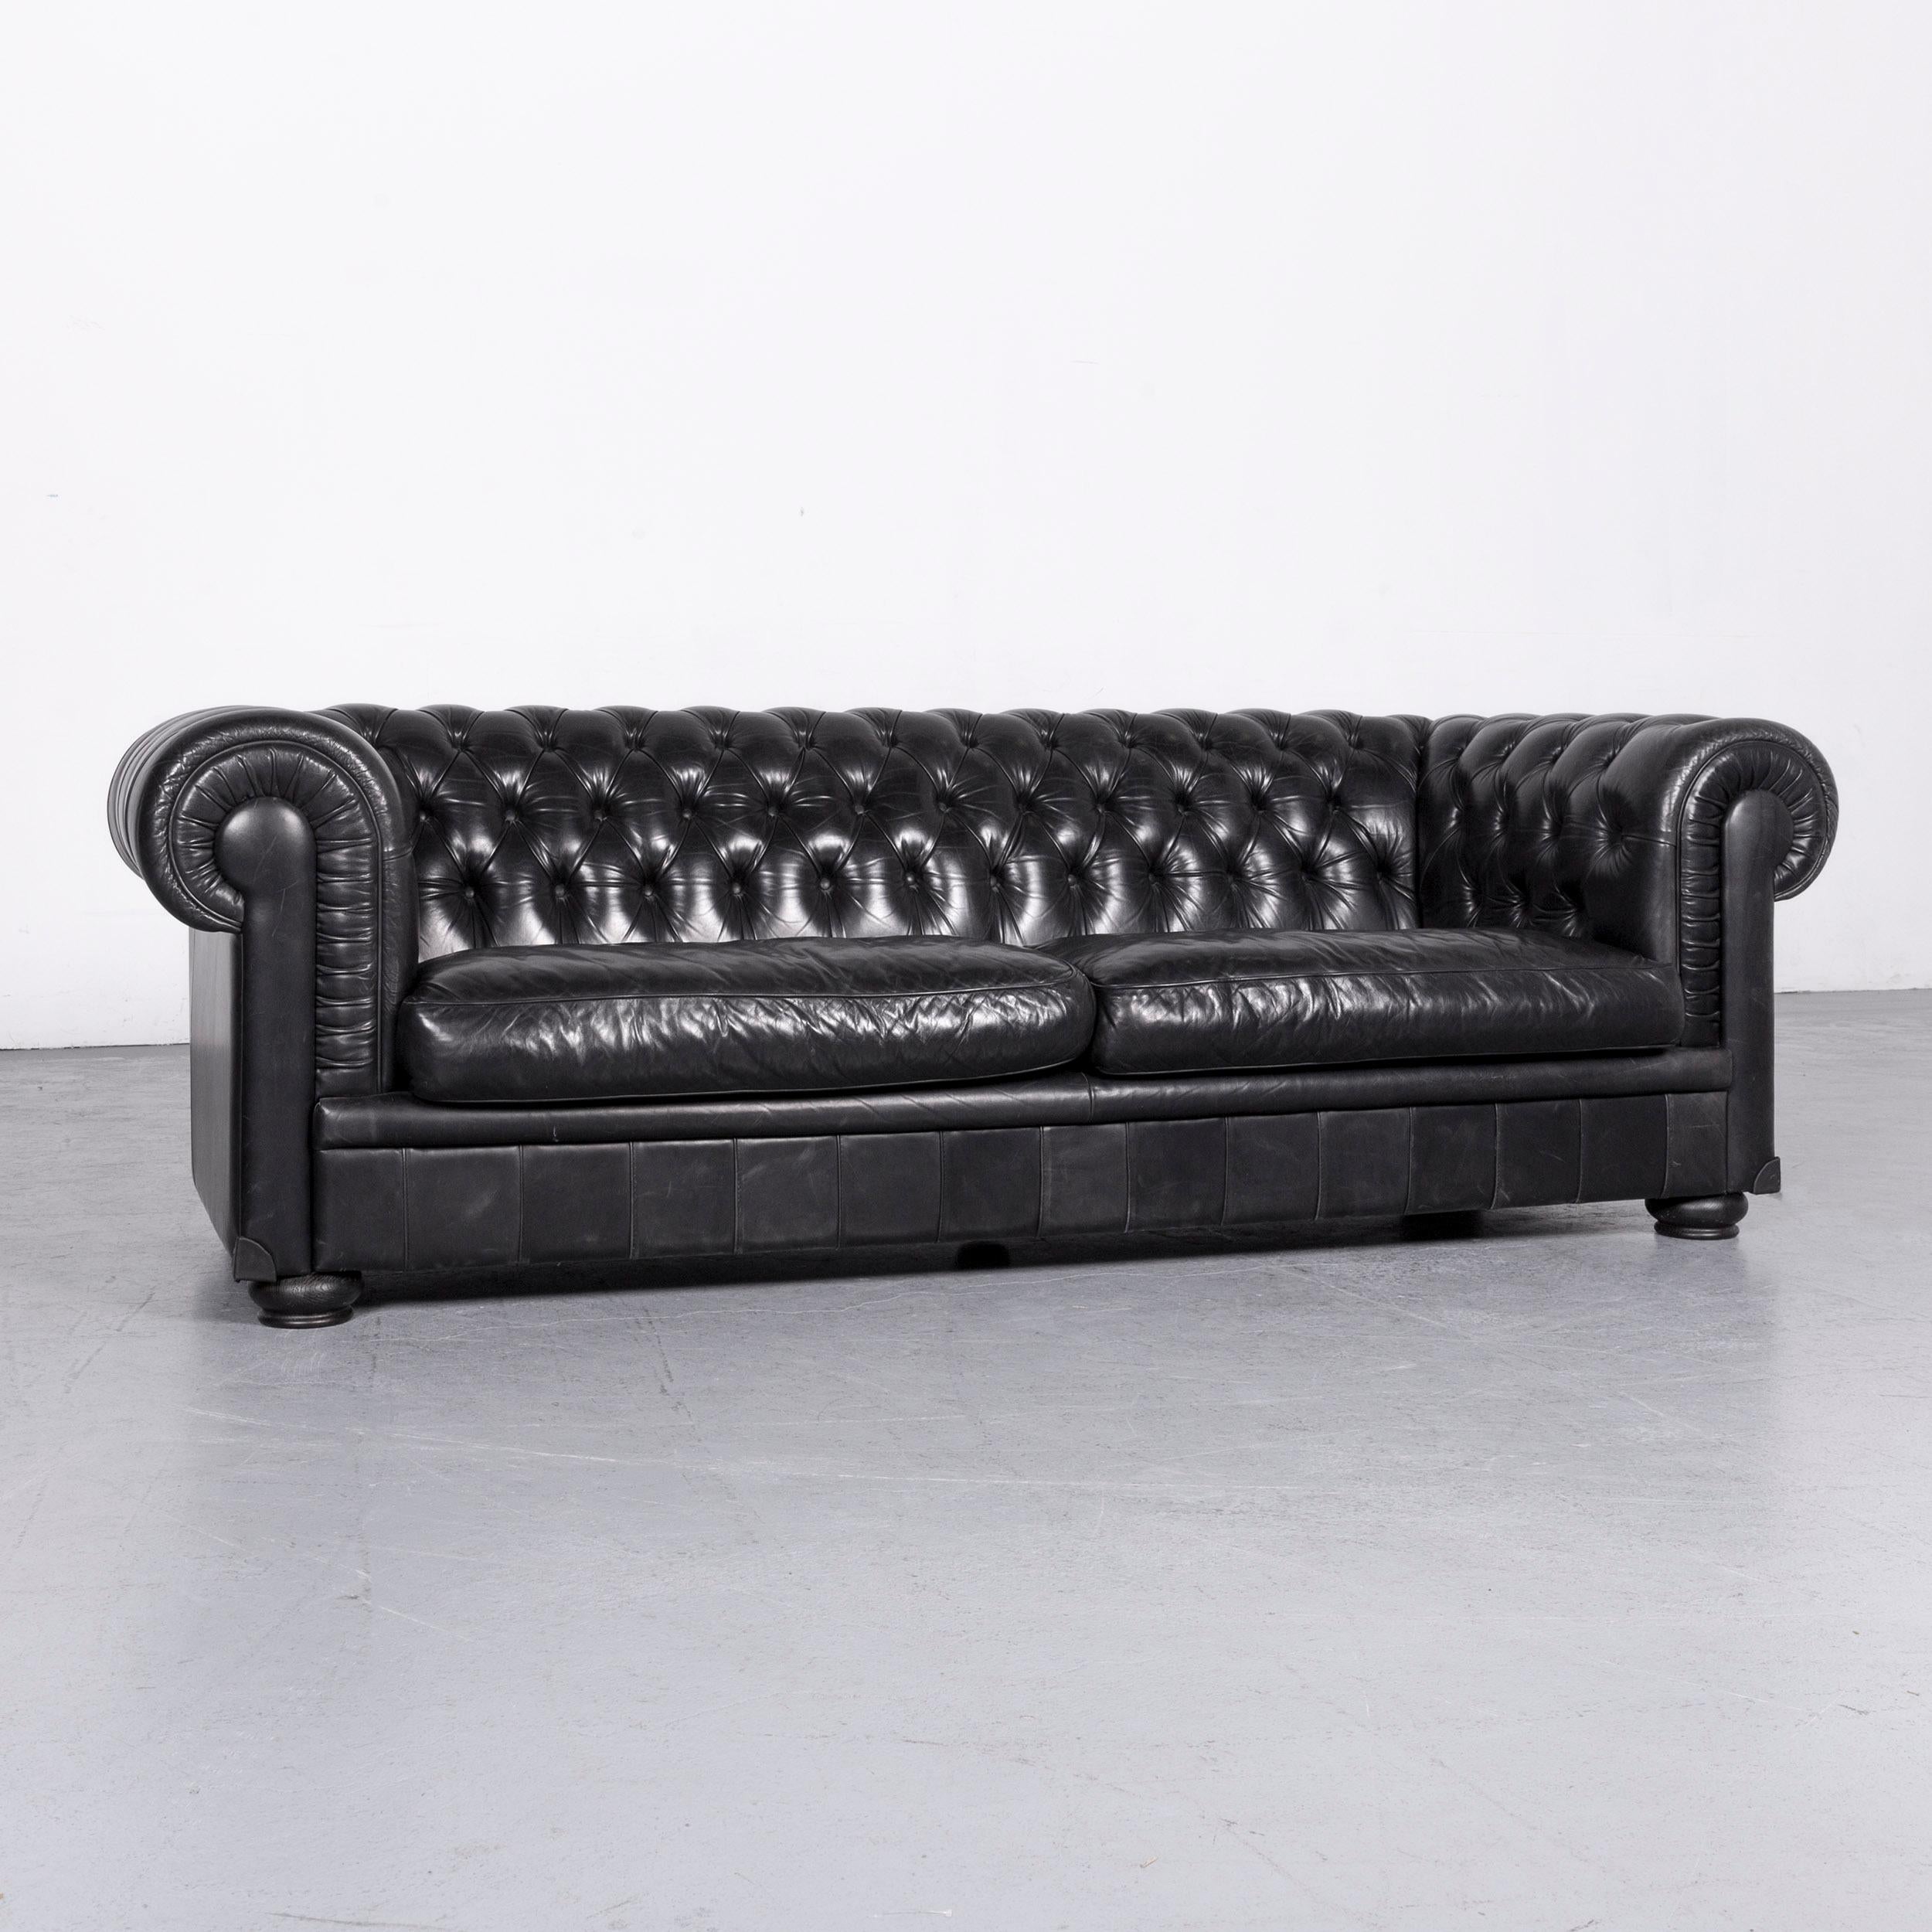 We bring to you a Natuzzi King designer leather sofa three-seat couch black in Chesterfield style.